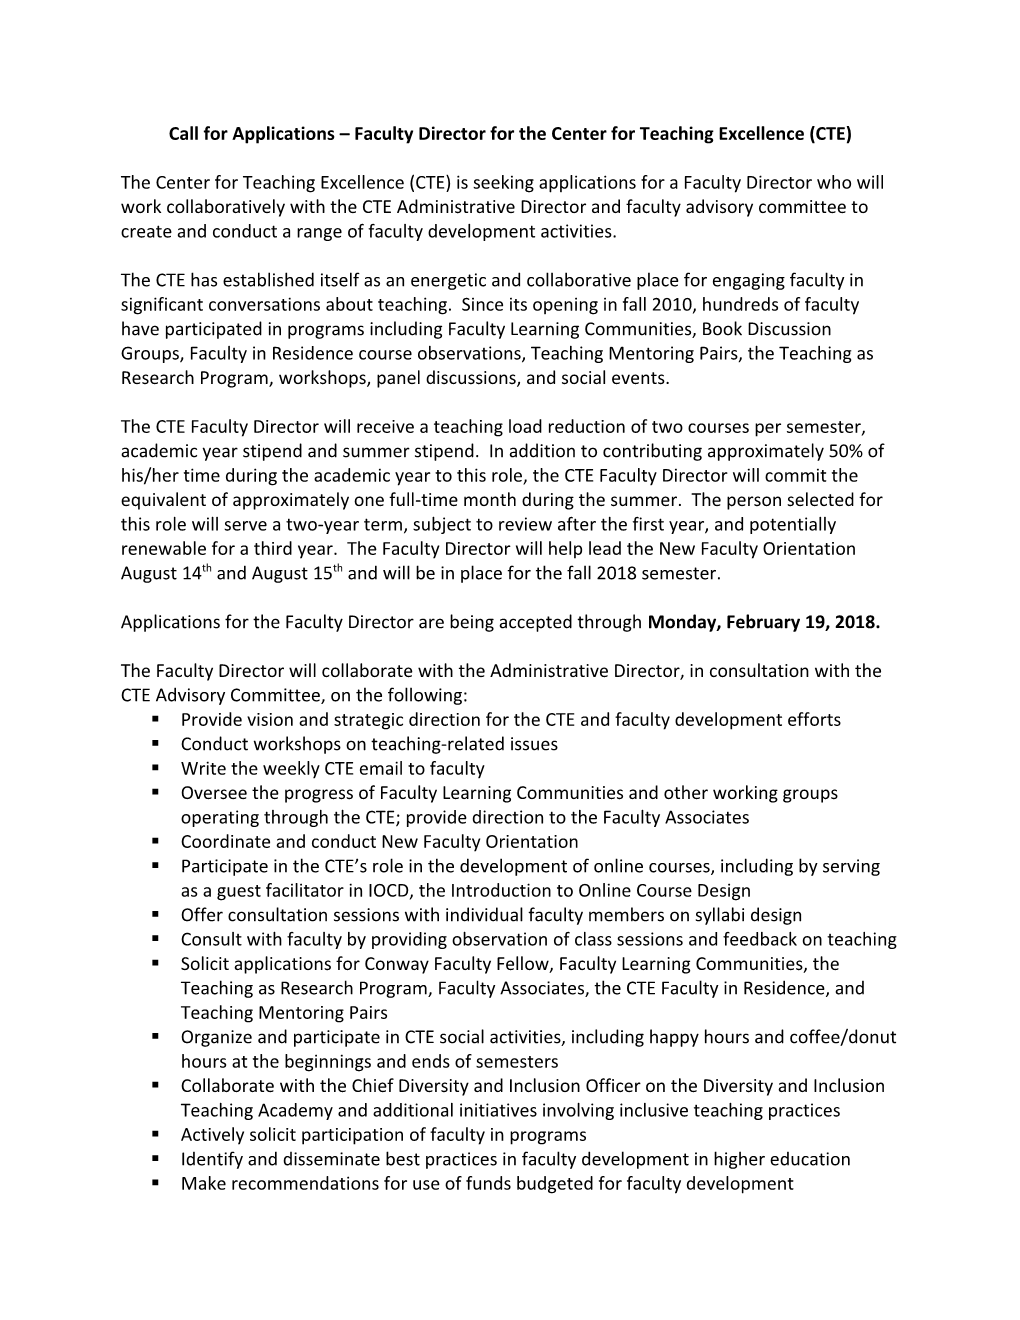 Call for Applications Faculty Director for the Center for Teaching Excellence (CTE)